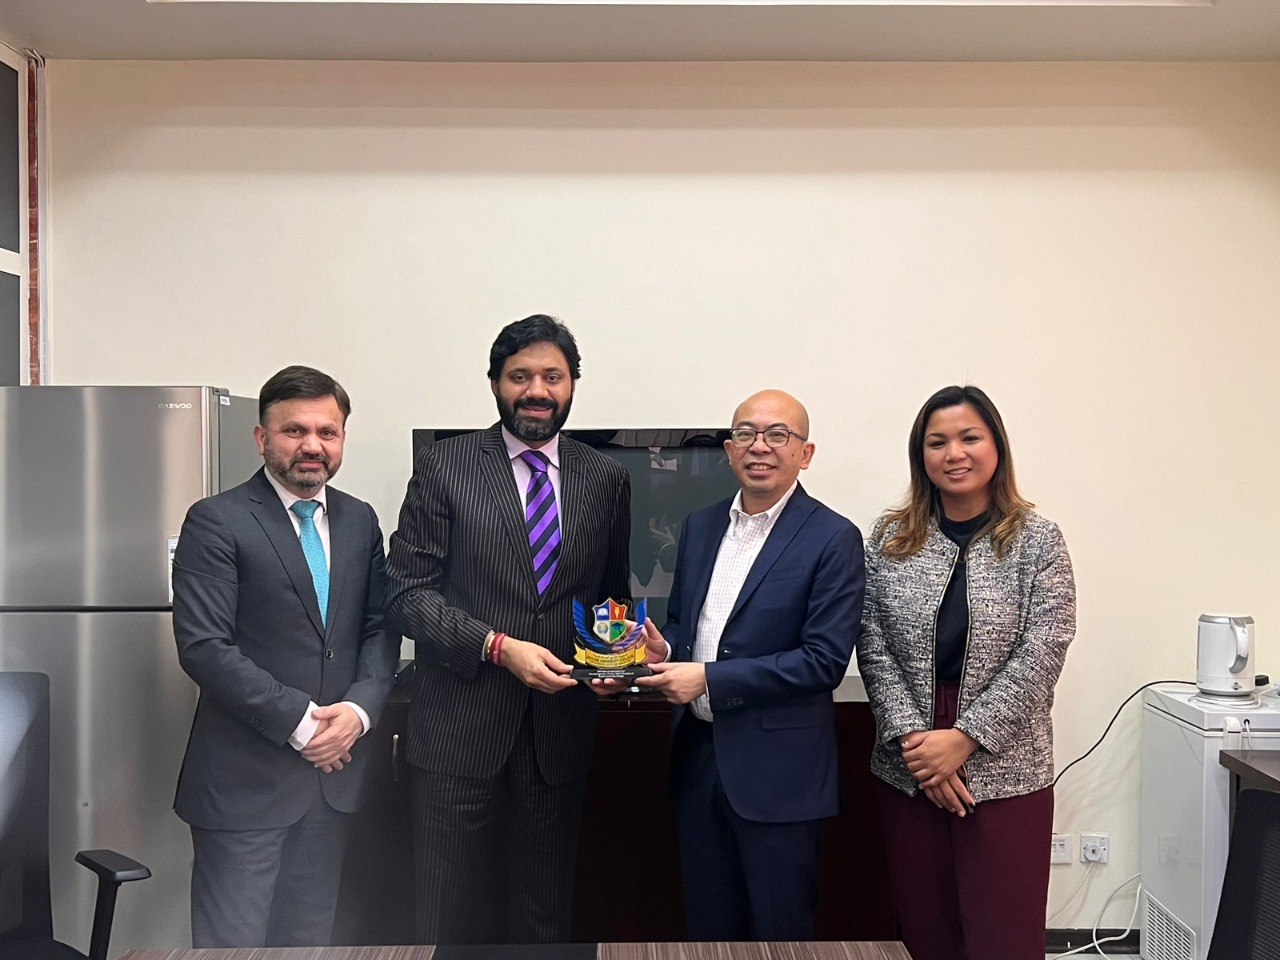 Skyline University College's Marketing & Communications Director and Board Member visit Consul General of Philippines in Dubai